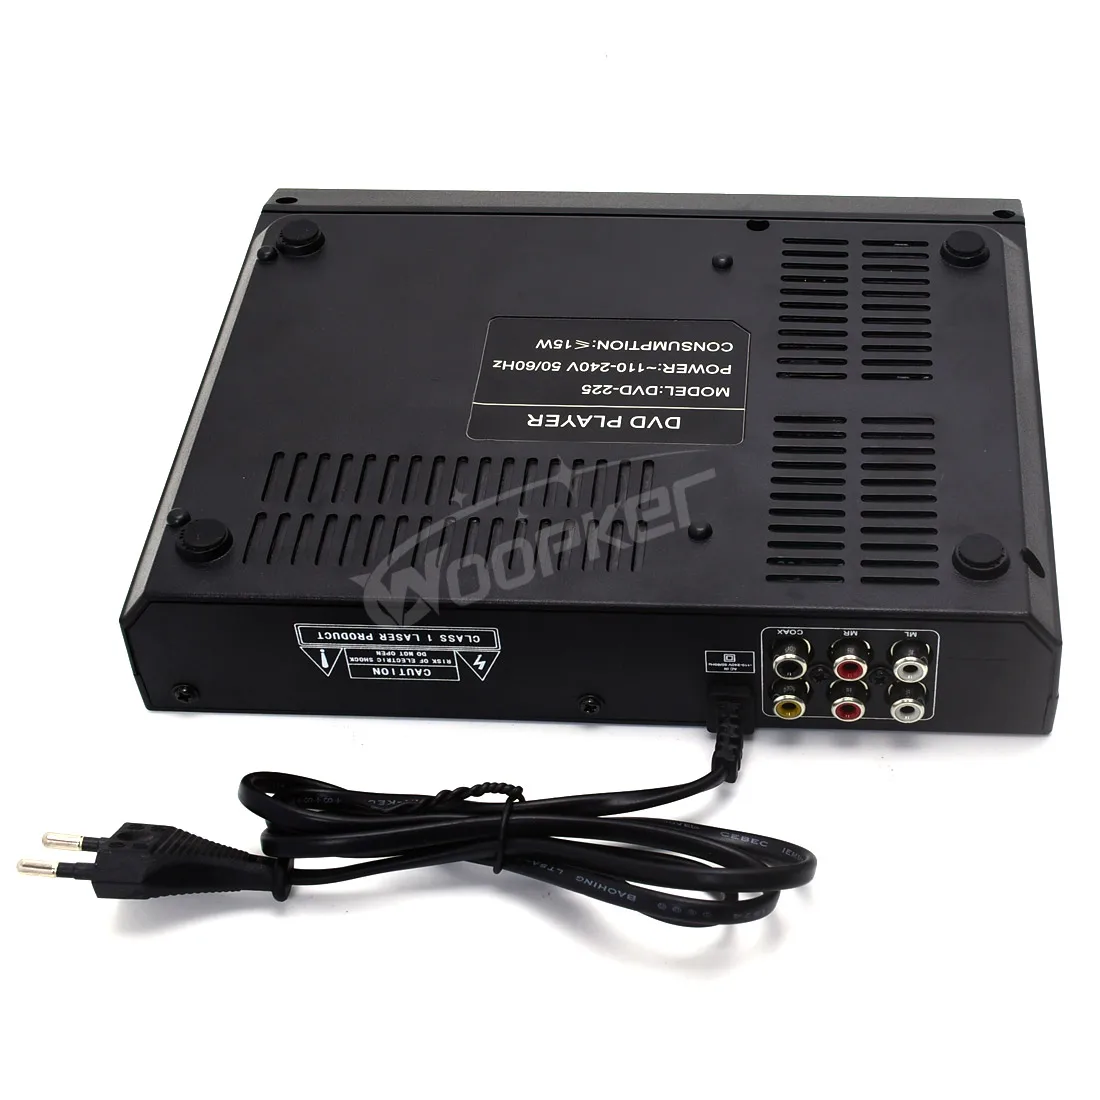 Woopker DVD-225 Player Multi Region Digital TV Disc Player Support DVD CD MP3 MP4 VCD USB Home Theatre System images - 6